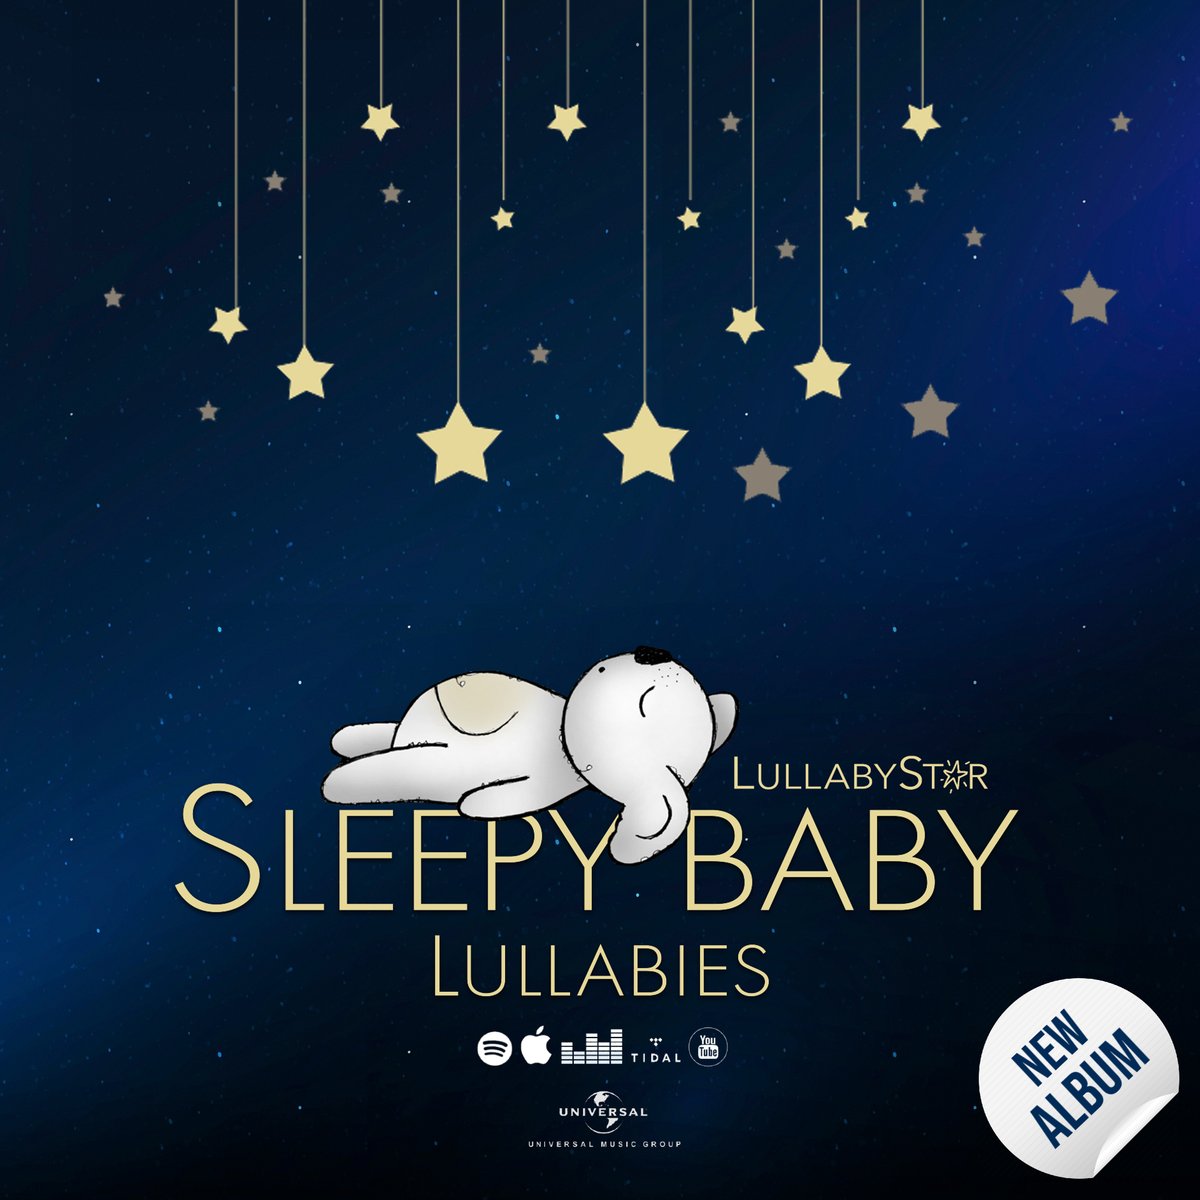 Its here! Our beautifully crafted 30-track album to treat ur littles ones. Link in bio 😍 To all the special parents: we get you! With our soothing and dreamy tunes, we'll lull your baby into a peaceful slumber, giving you some well-deserved rest.  #babylullabies #babymusic